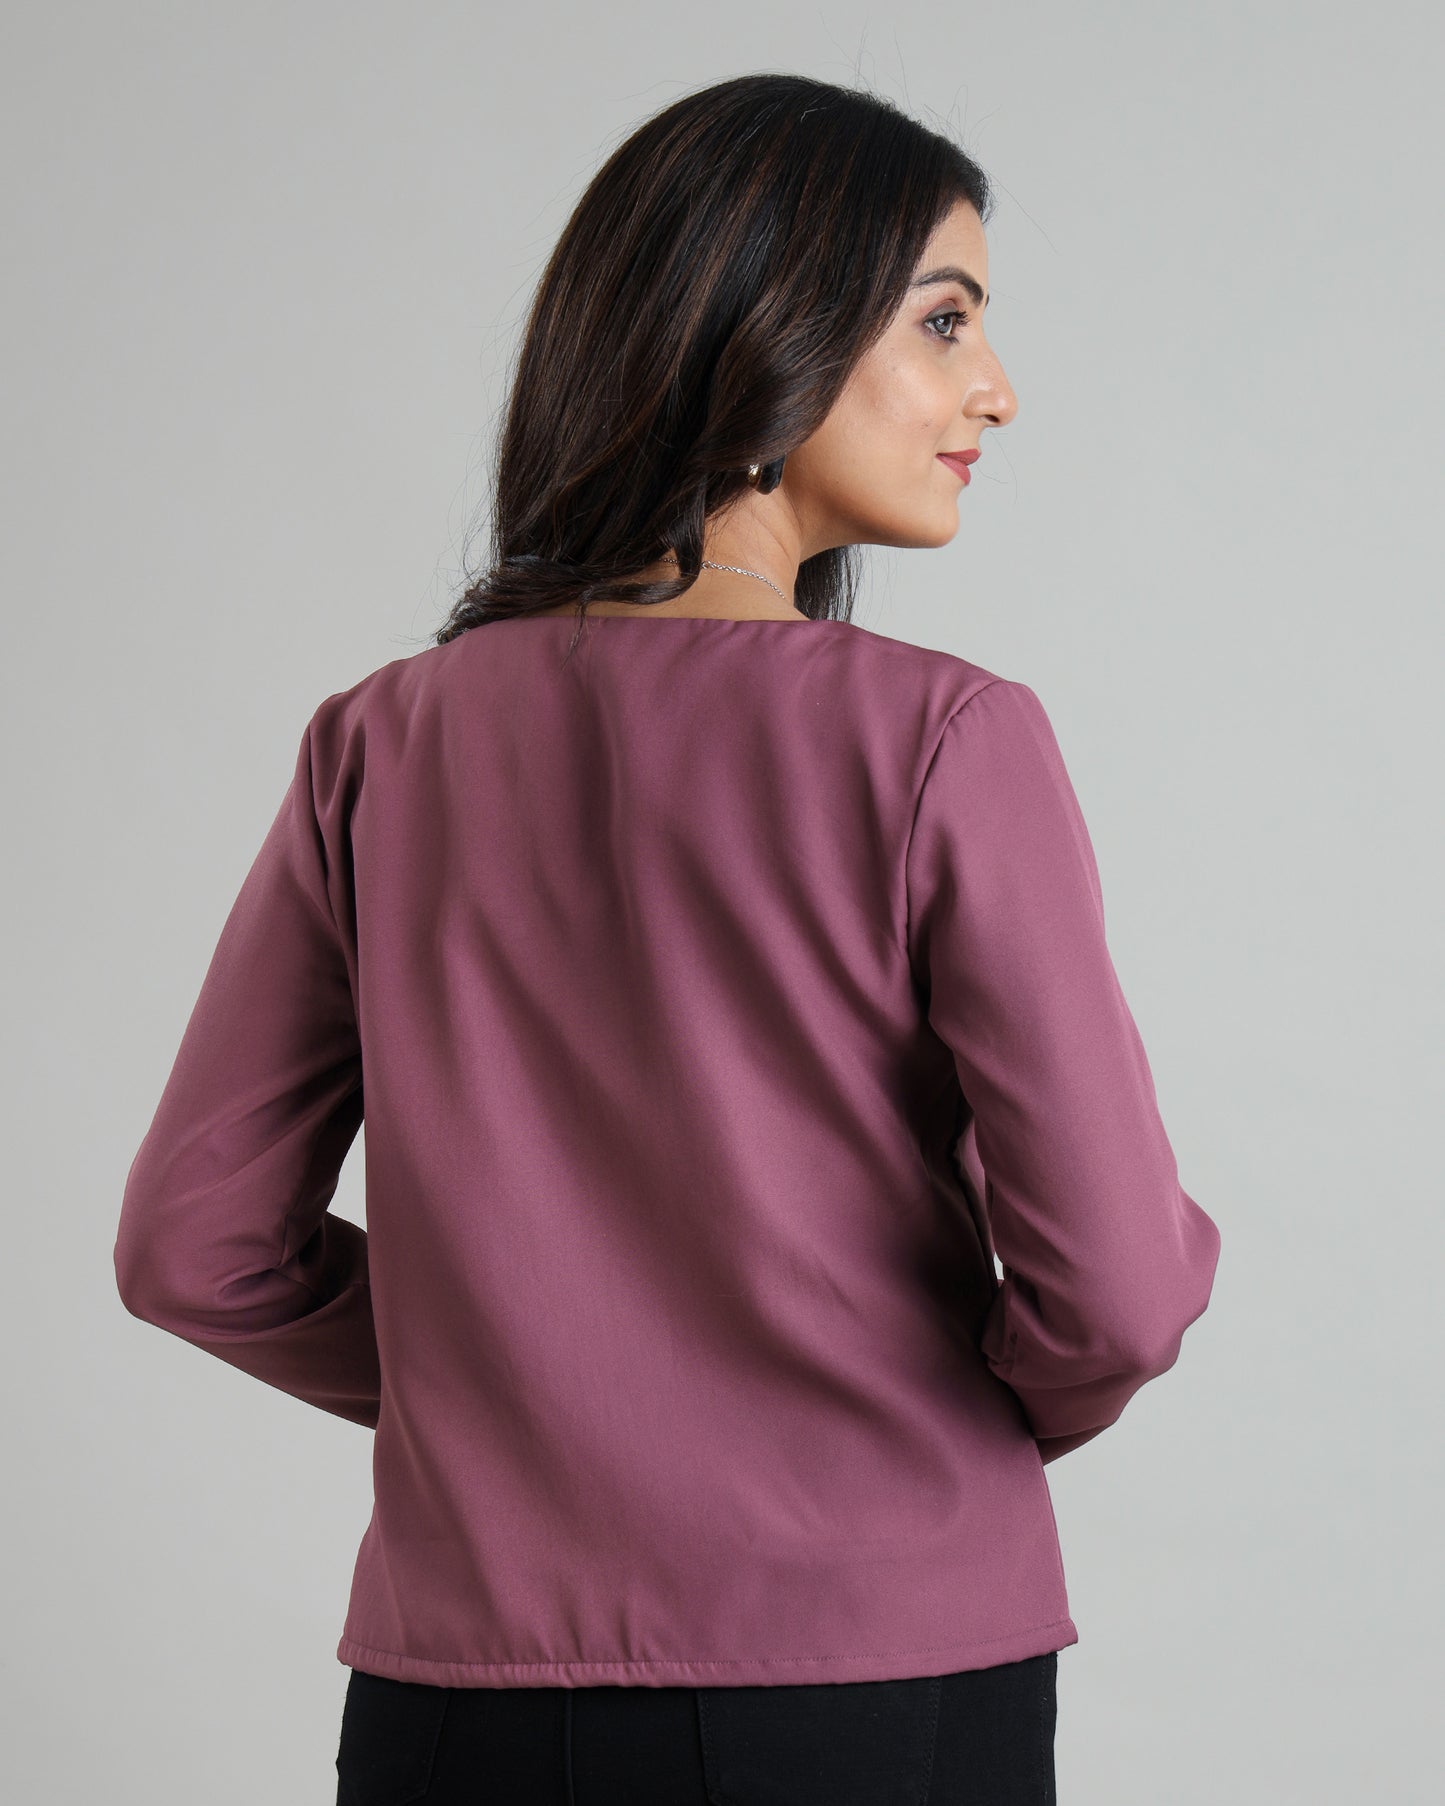 Wine And Shine: The Boldly Purple Women's Jacket